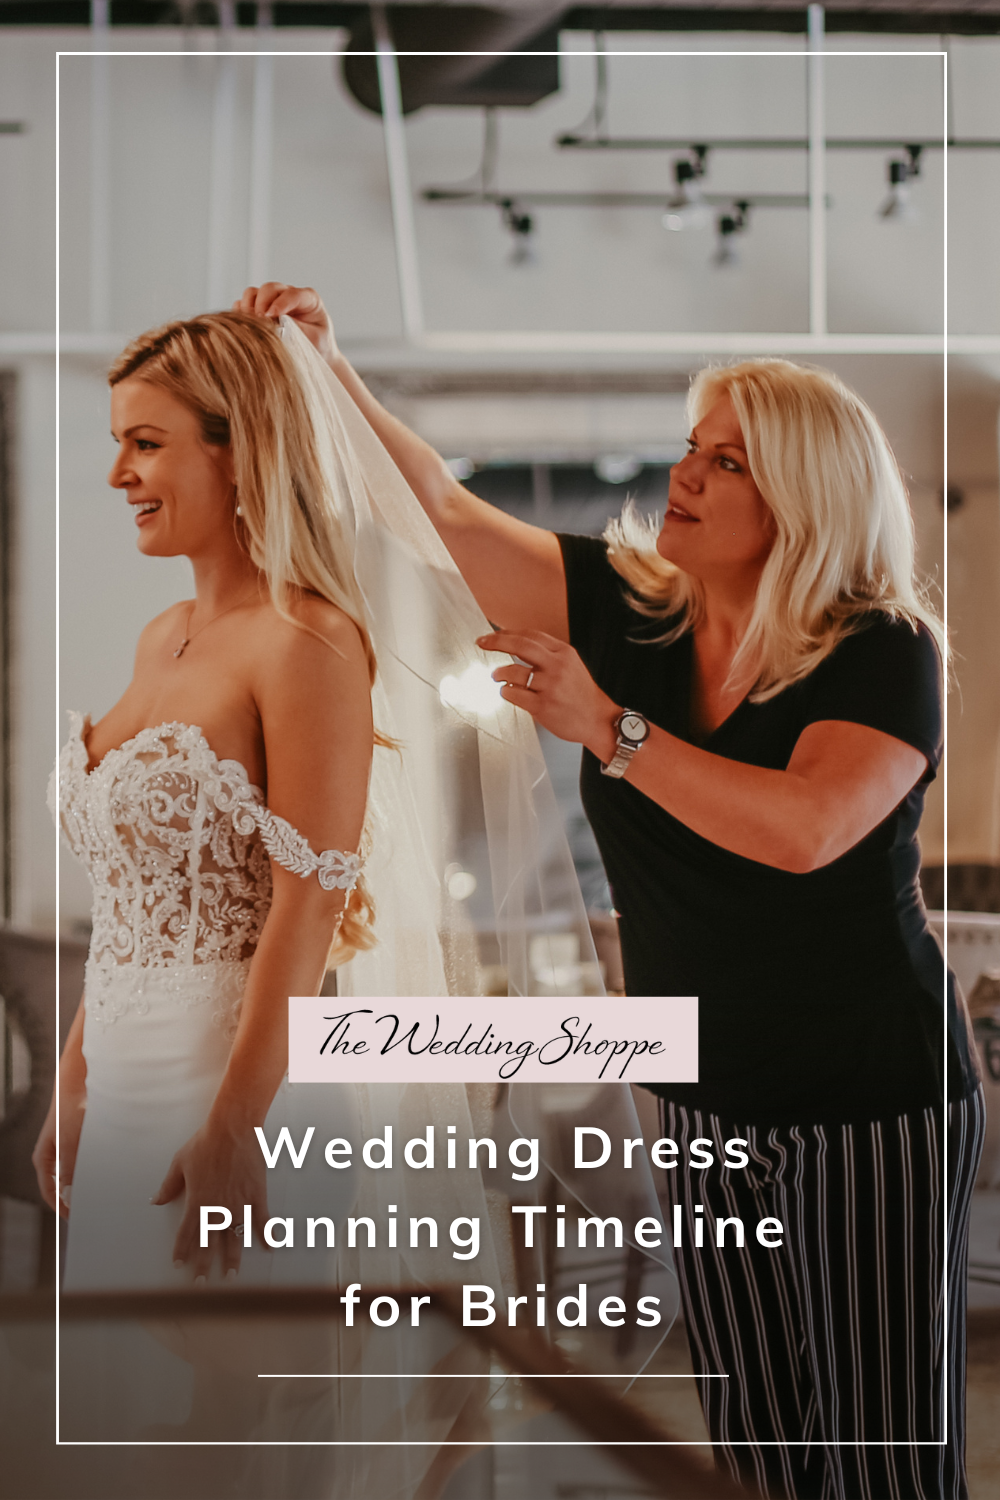 blog post graphic for "Wedding Dress Planning Timeline for Brides" from the Wedding Shoppe